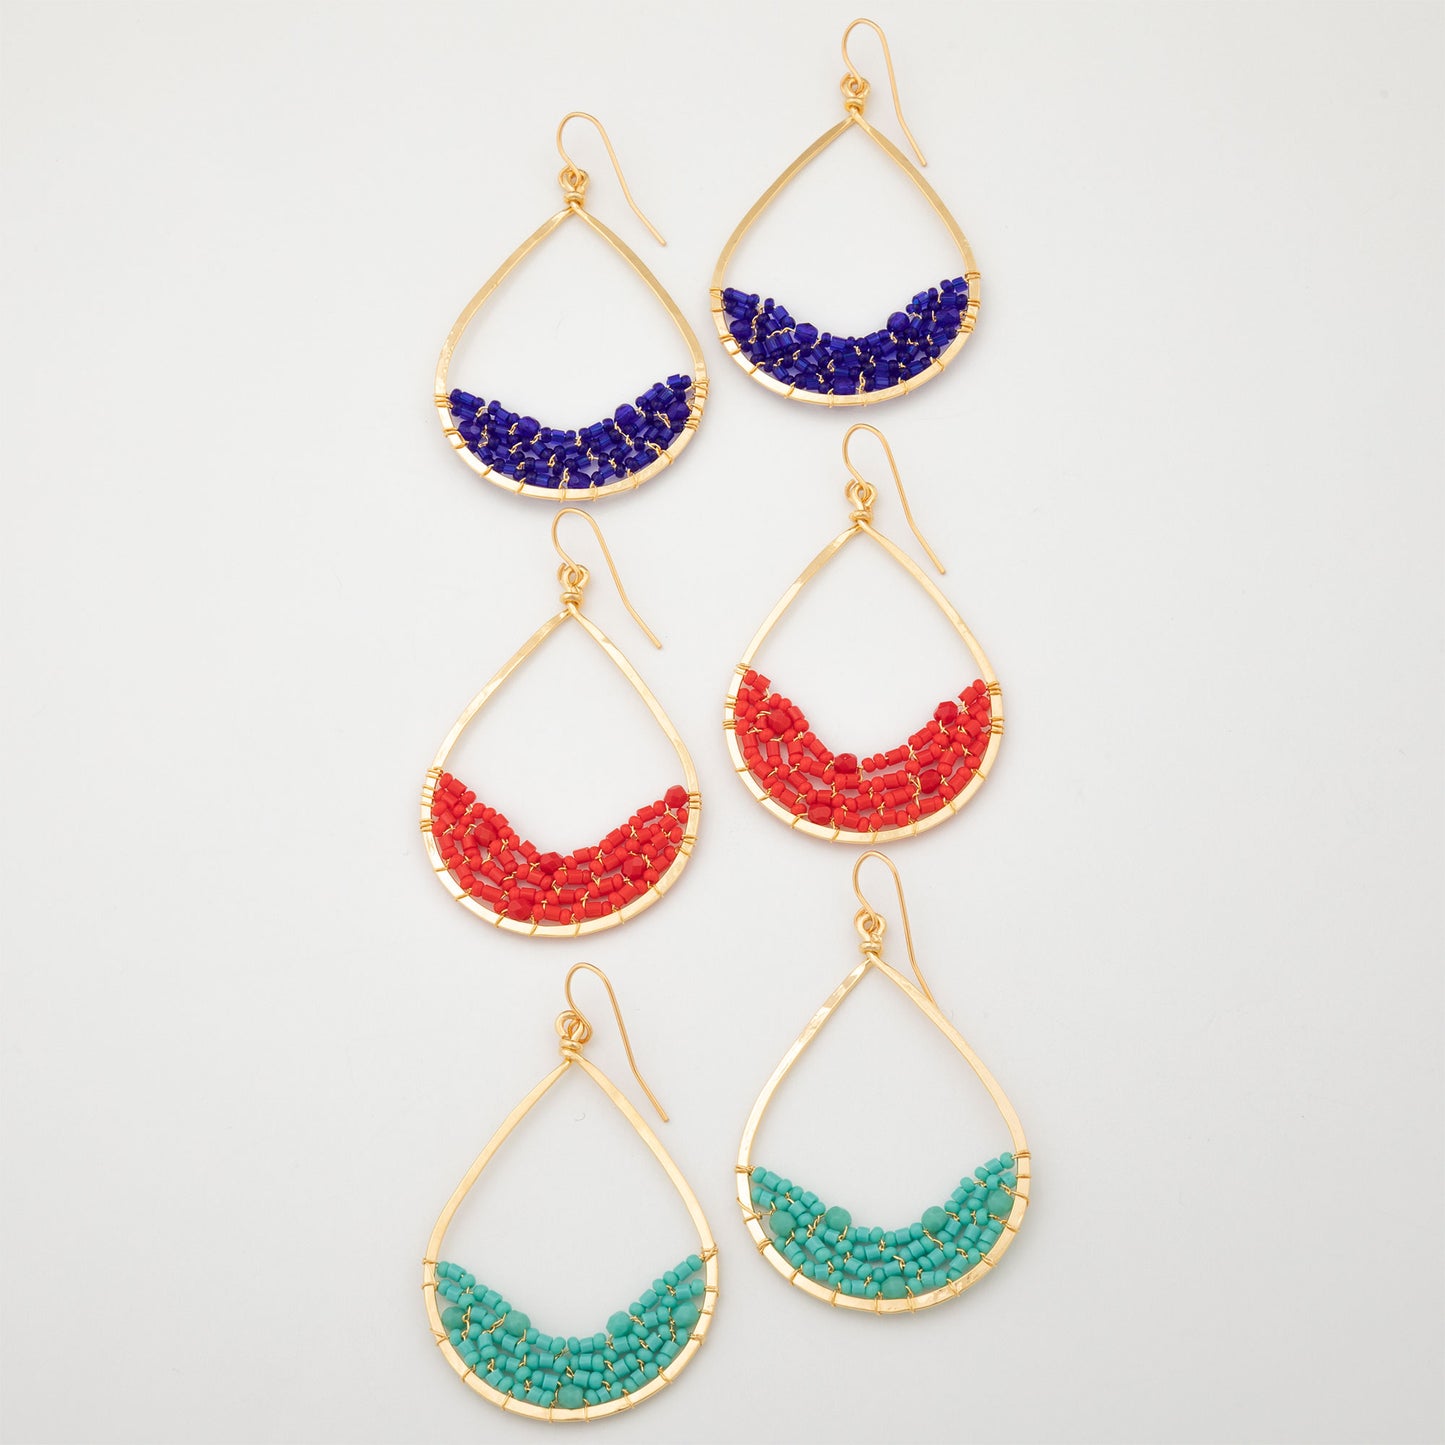 Colorful Golden Hammered Tear Drop Earrings